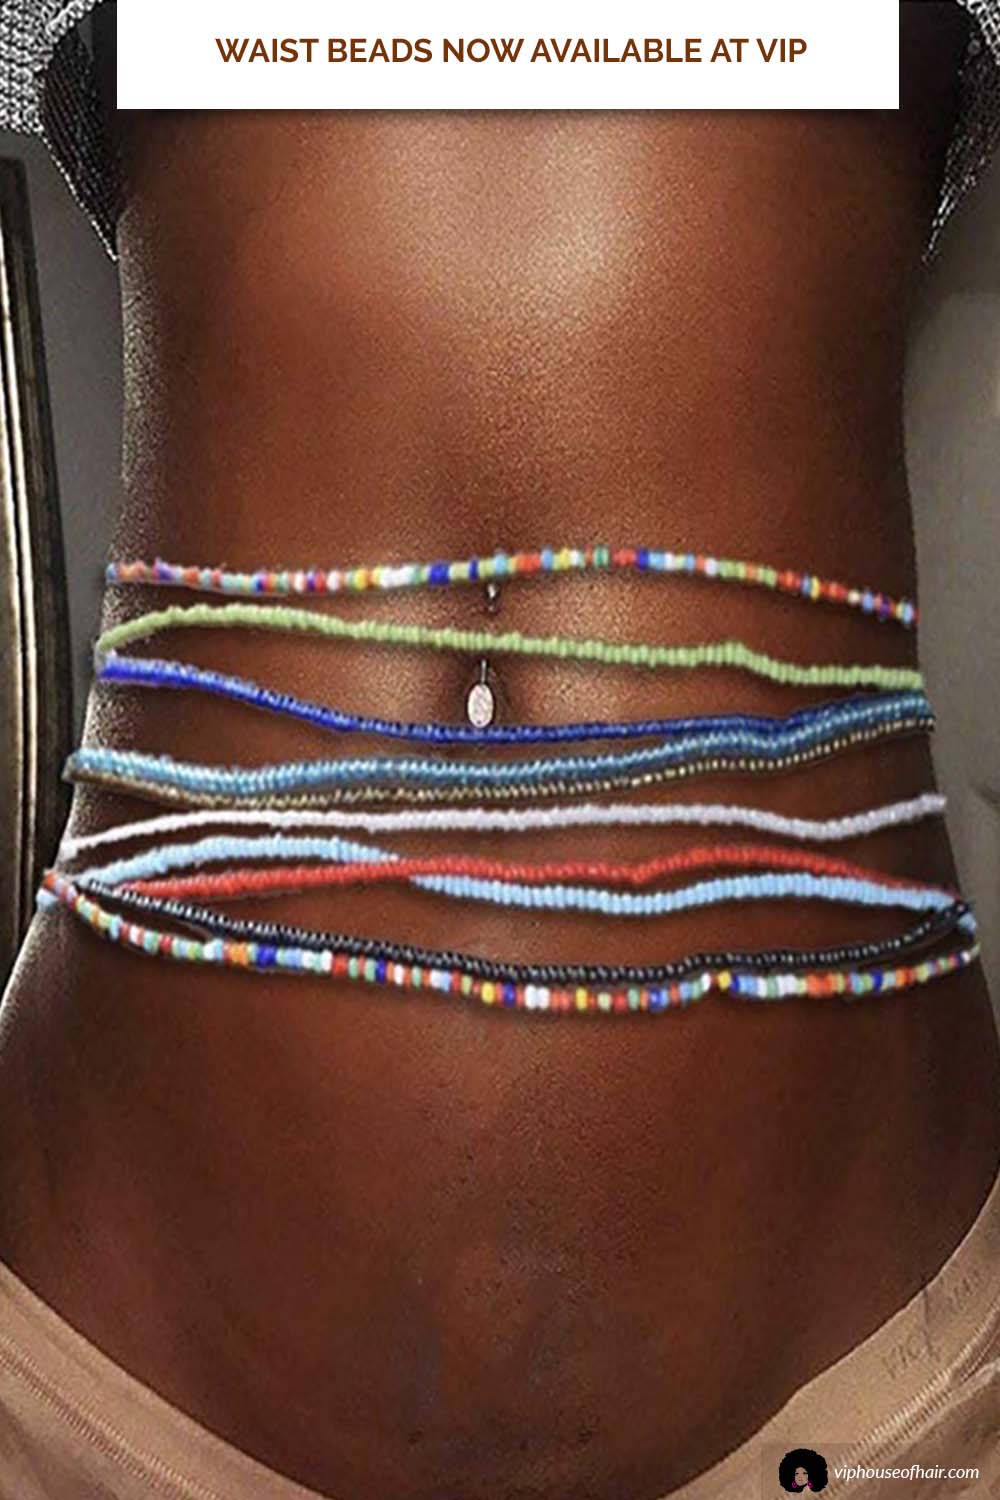 Waist Beads Now Available At VIP!